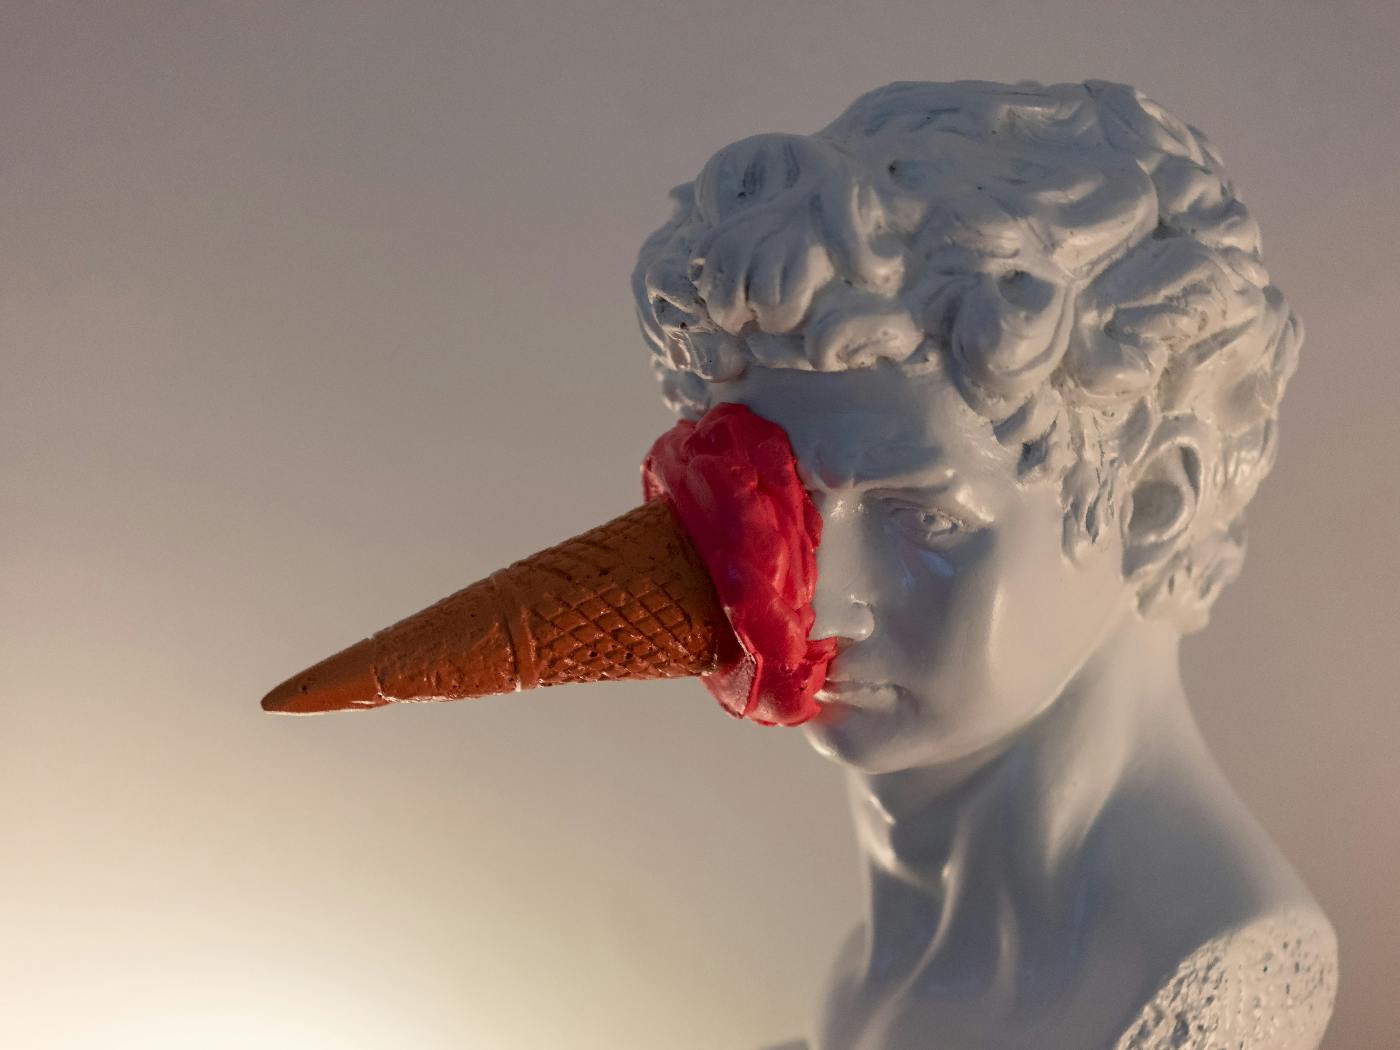 The marble bust of a man with a red ice cream cone stuck to his face